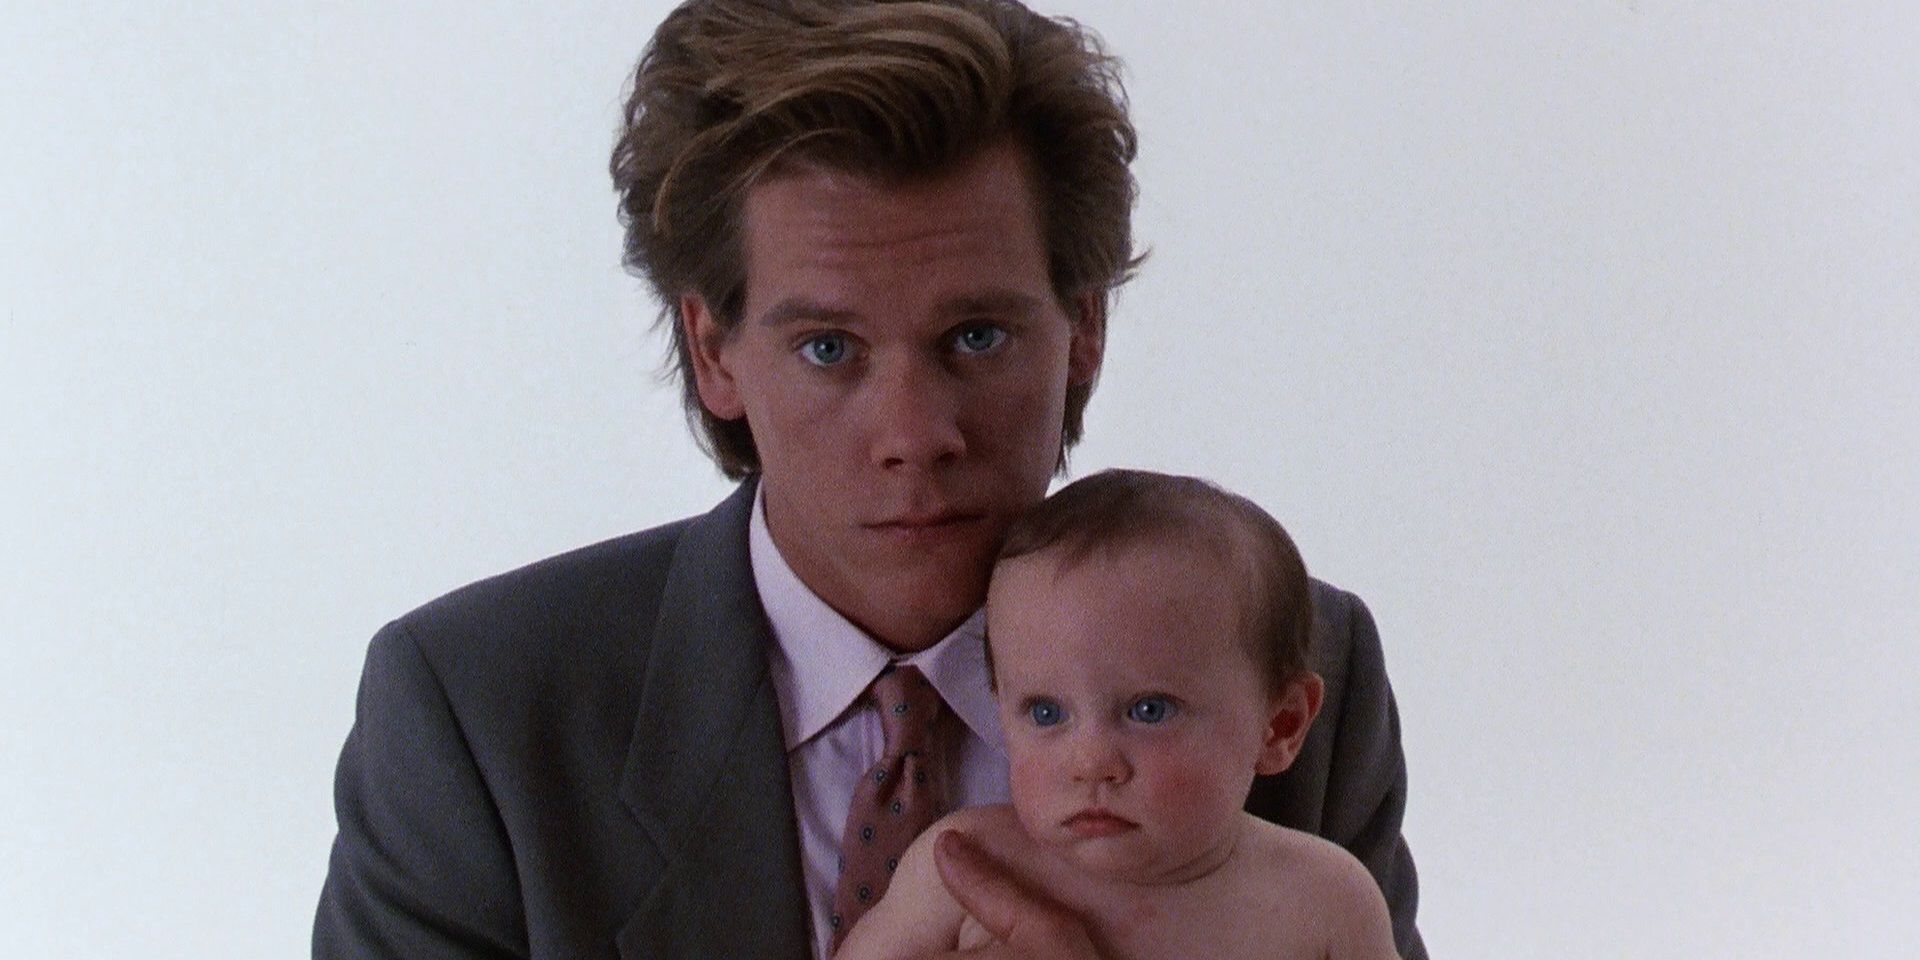 Kevin_Bacon_with_a_baby_in_She's_Having_a_Baby